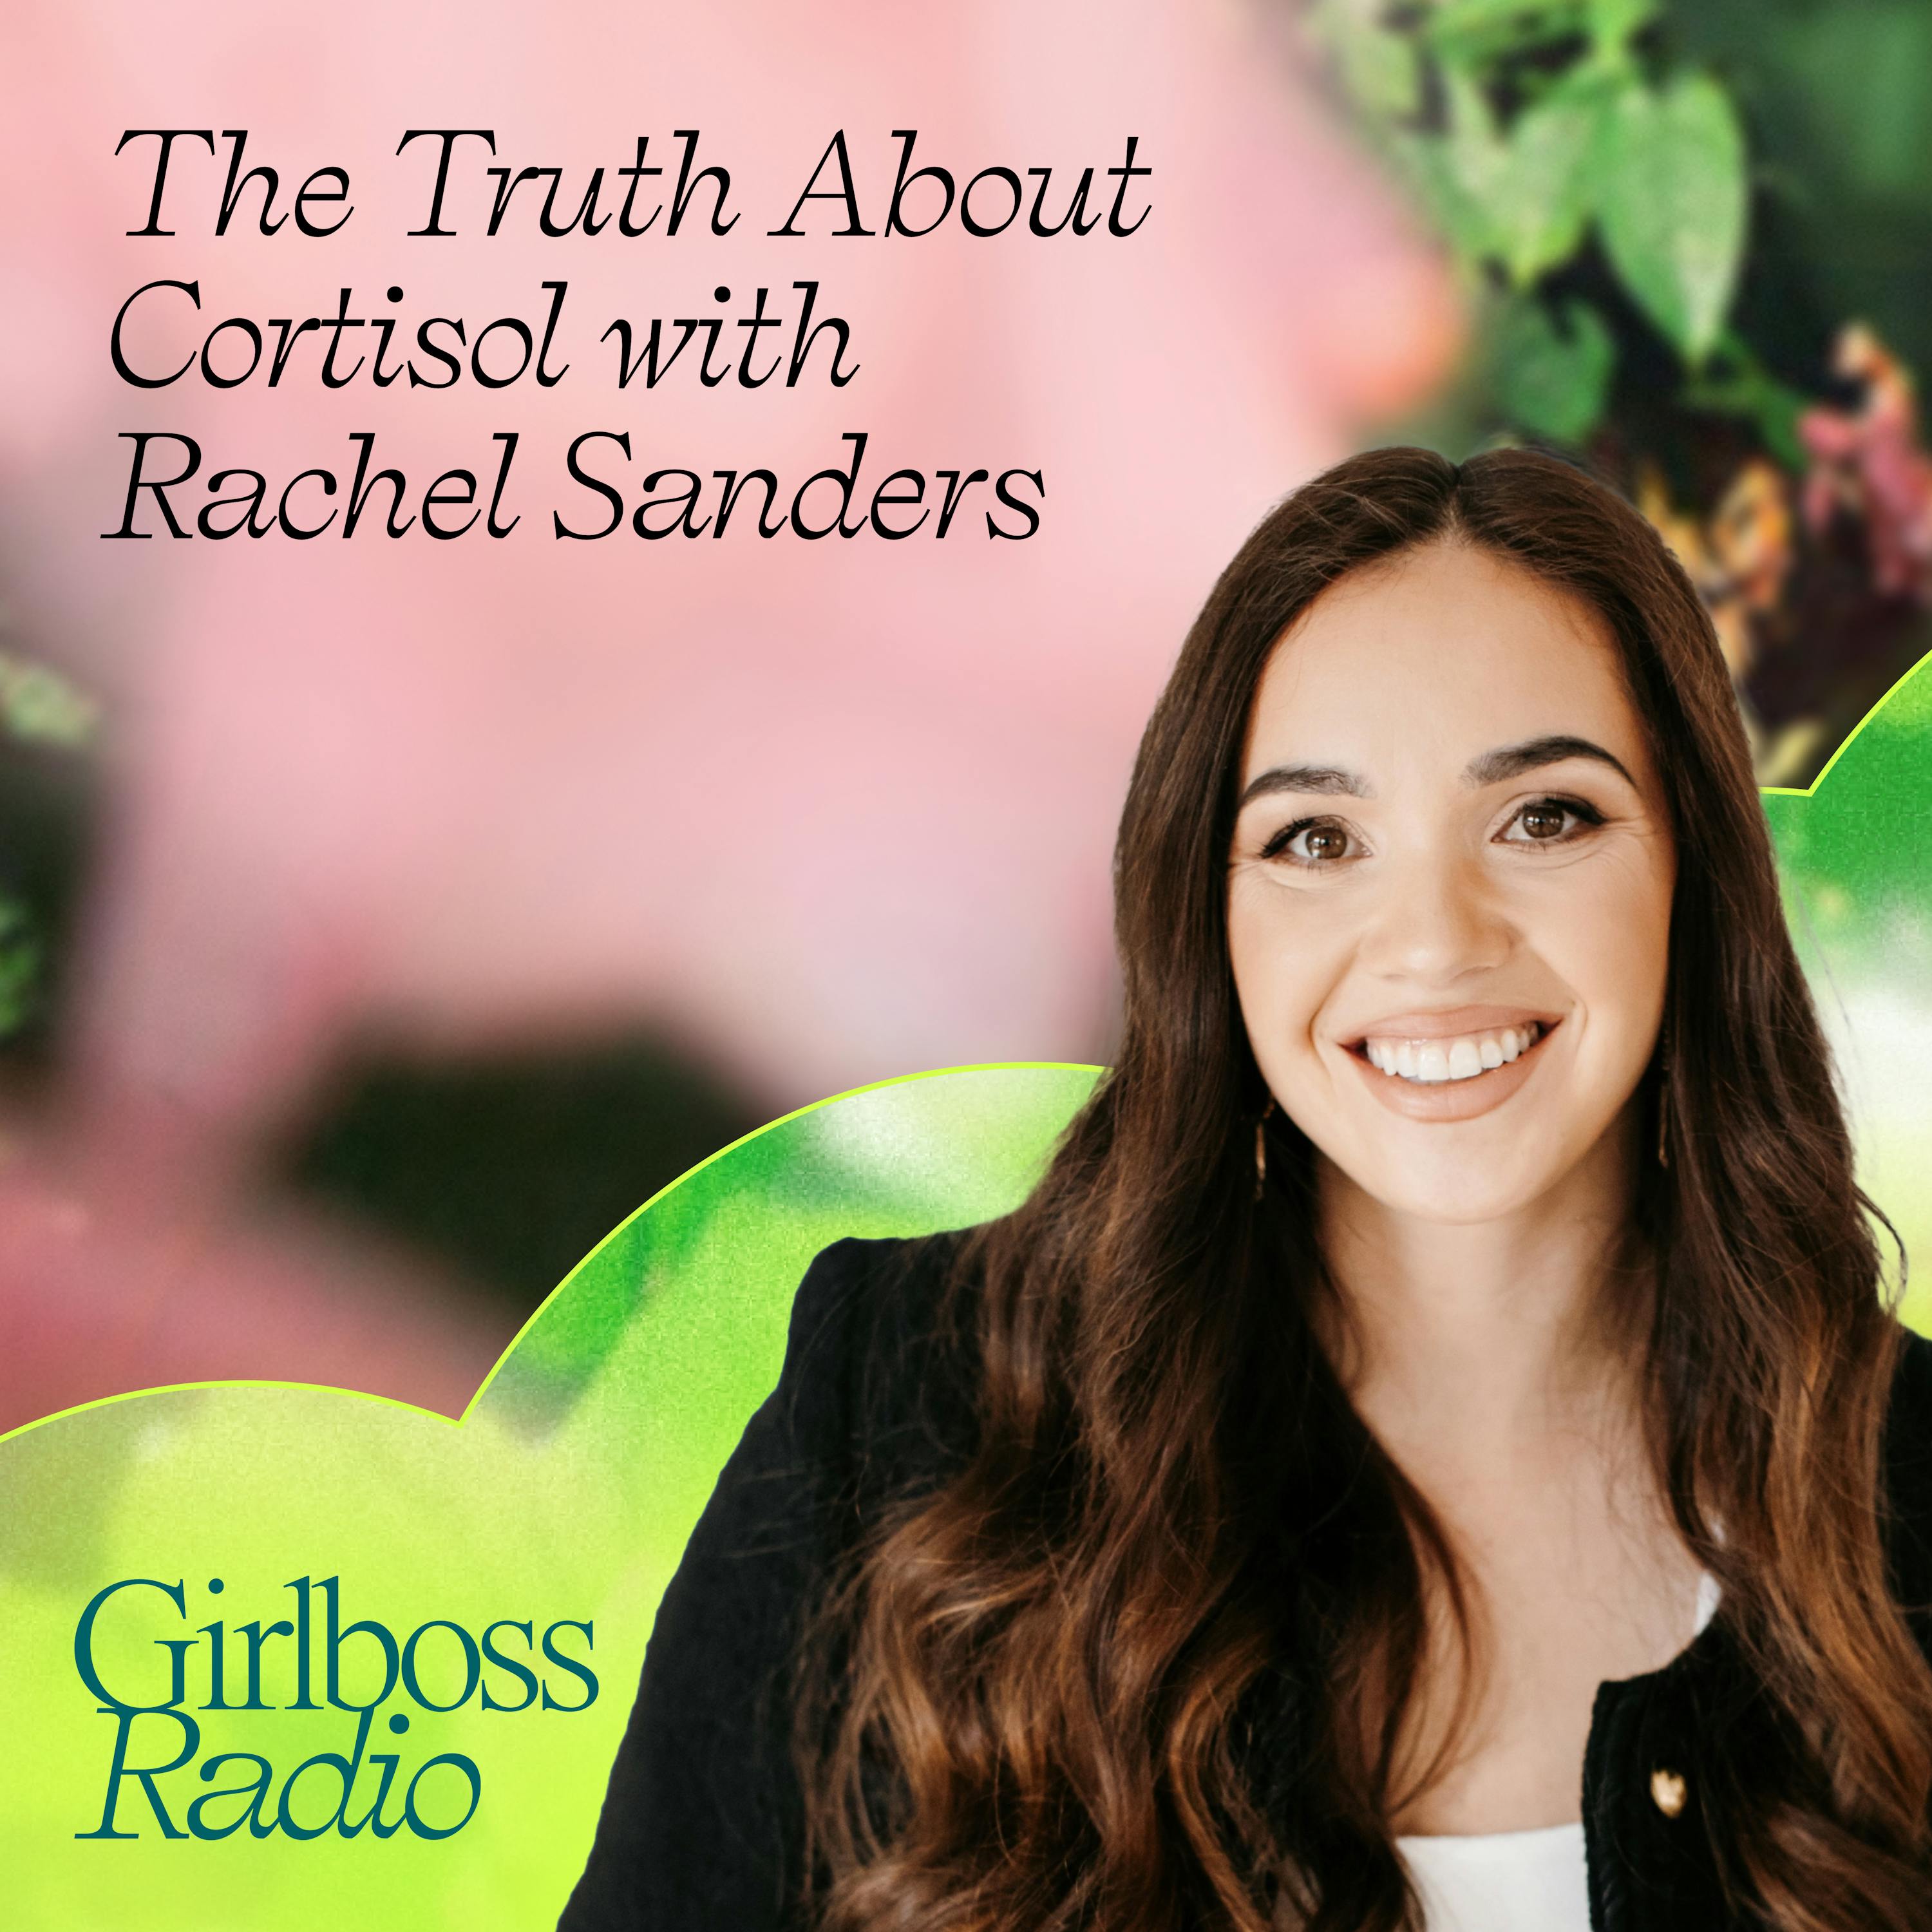 The Truth About Cortisol with Rachel Sanders